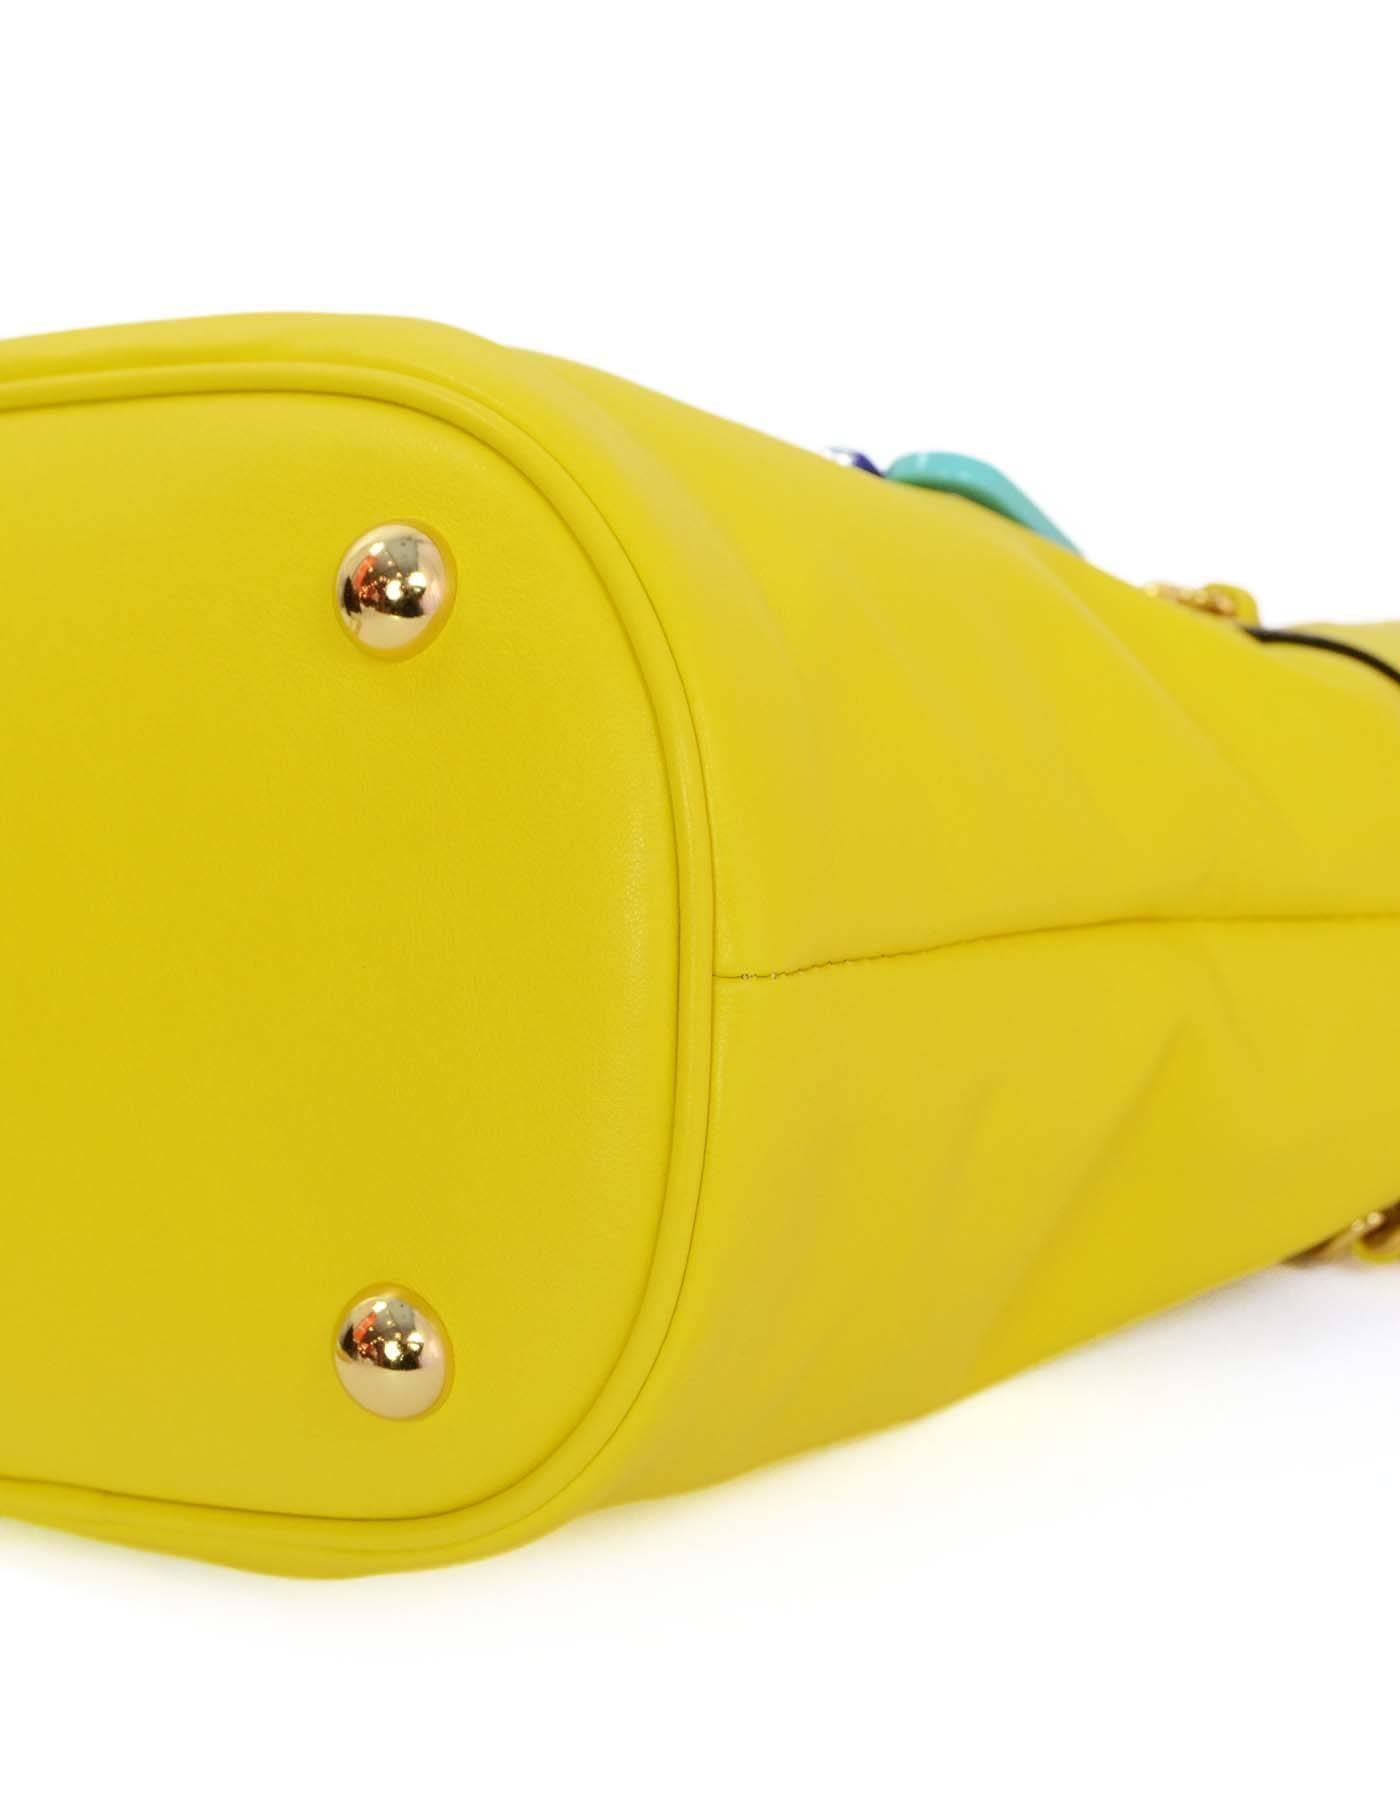 Moschino SOLD OUT Yellow Charm Bucket Crossbody Bag GHW 1